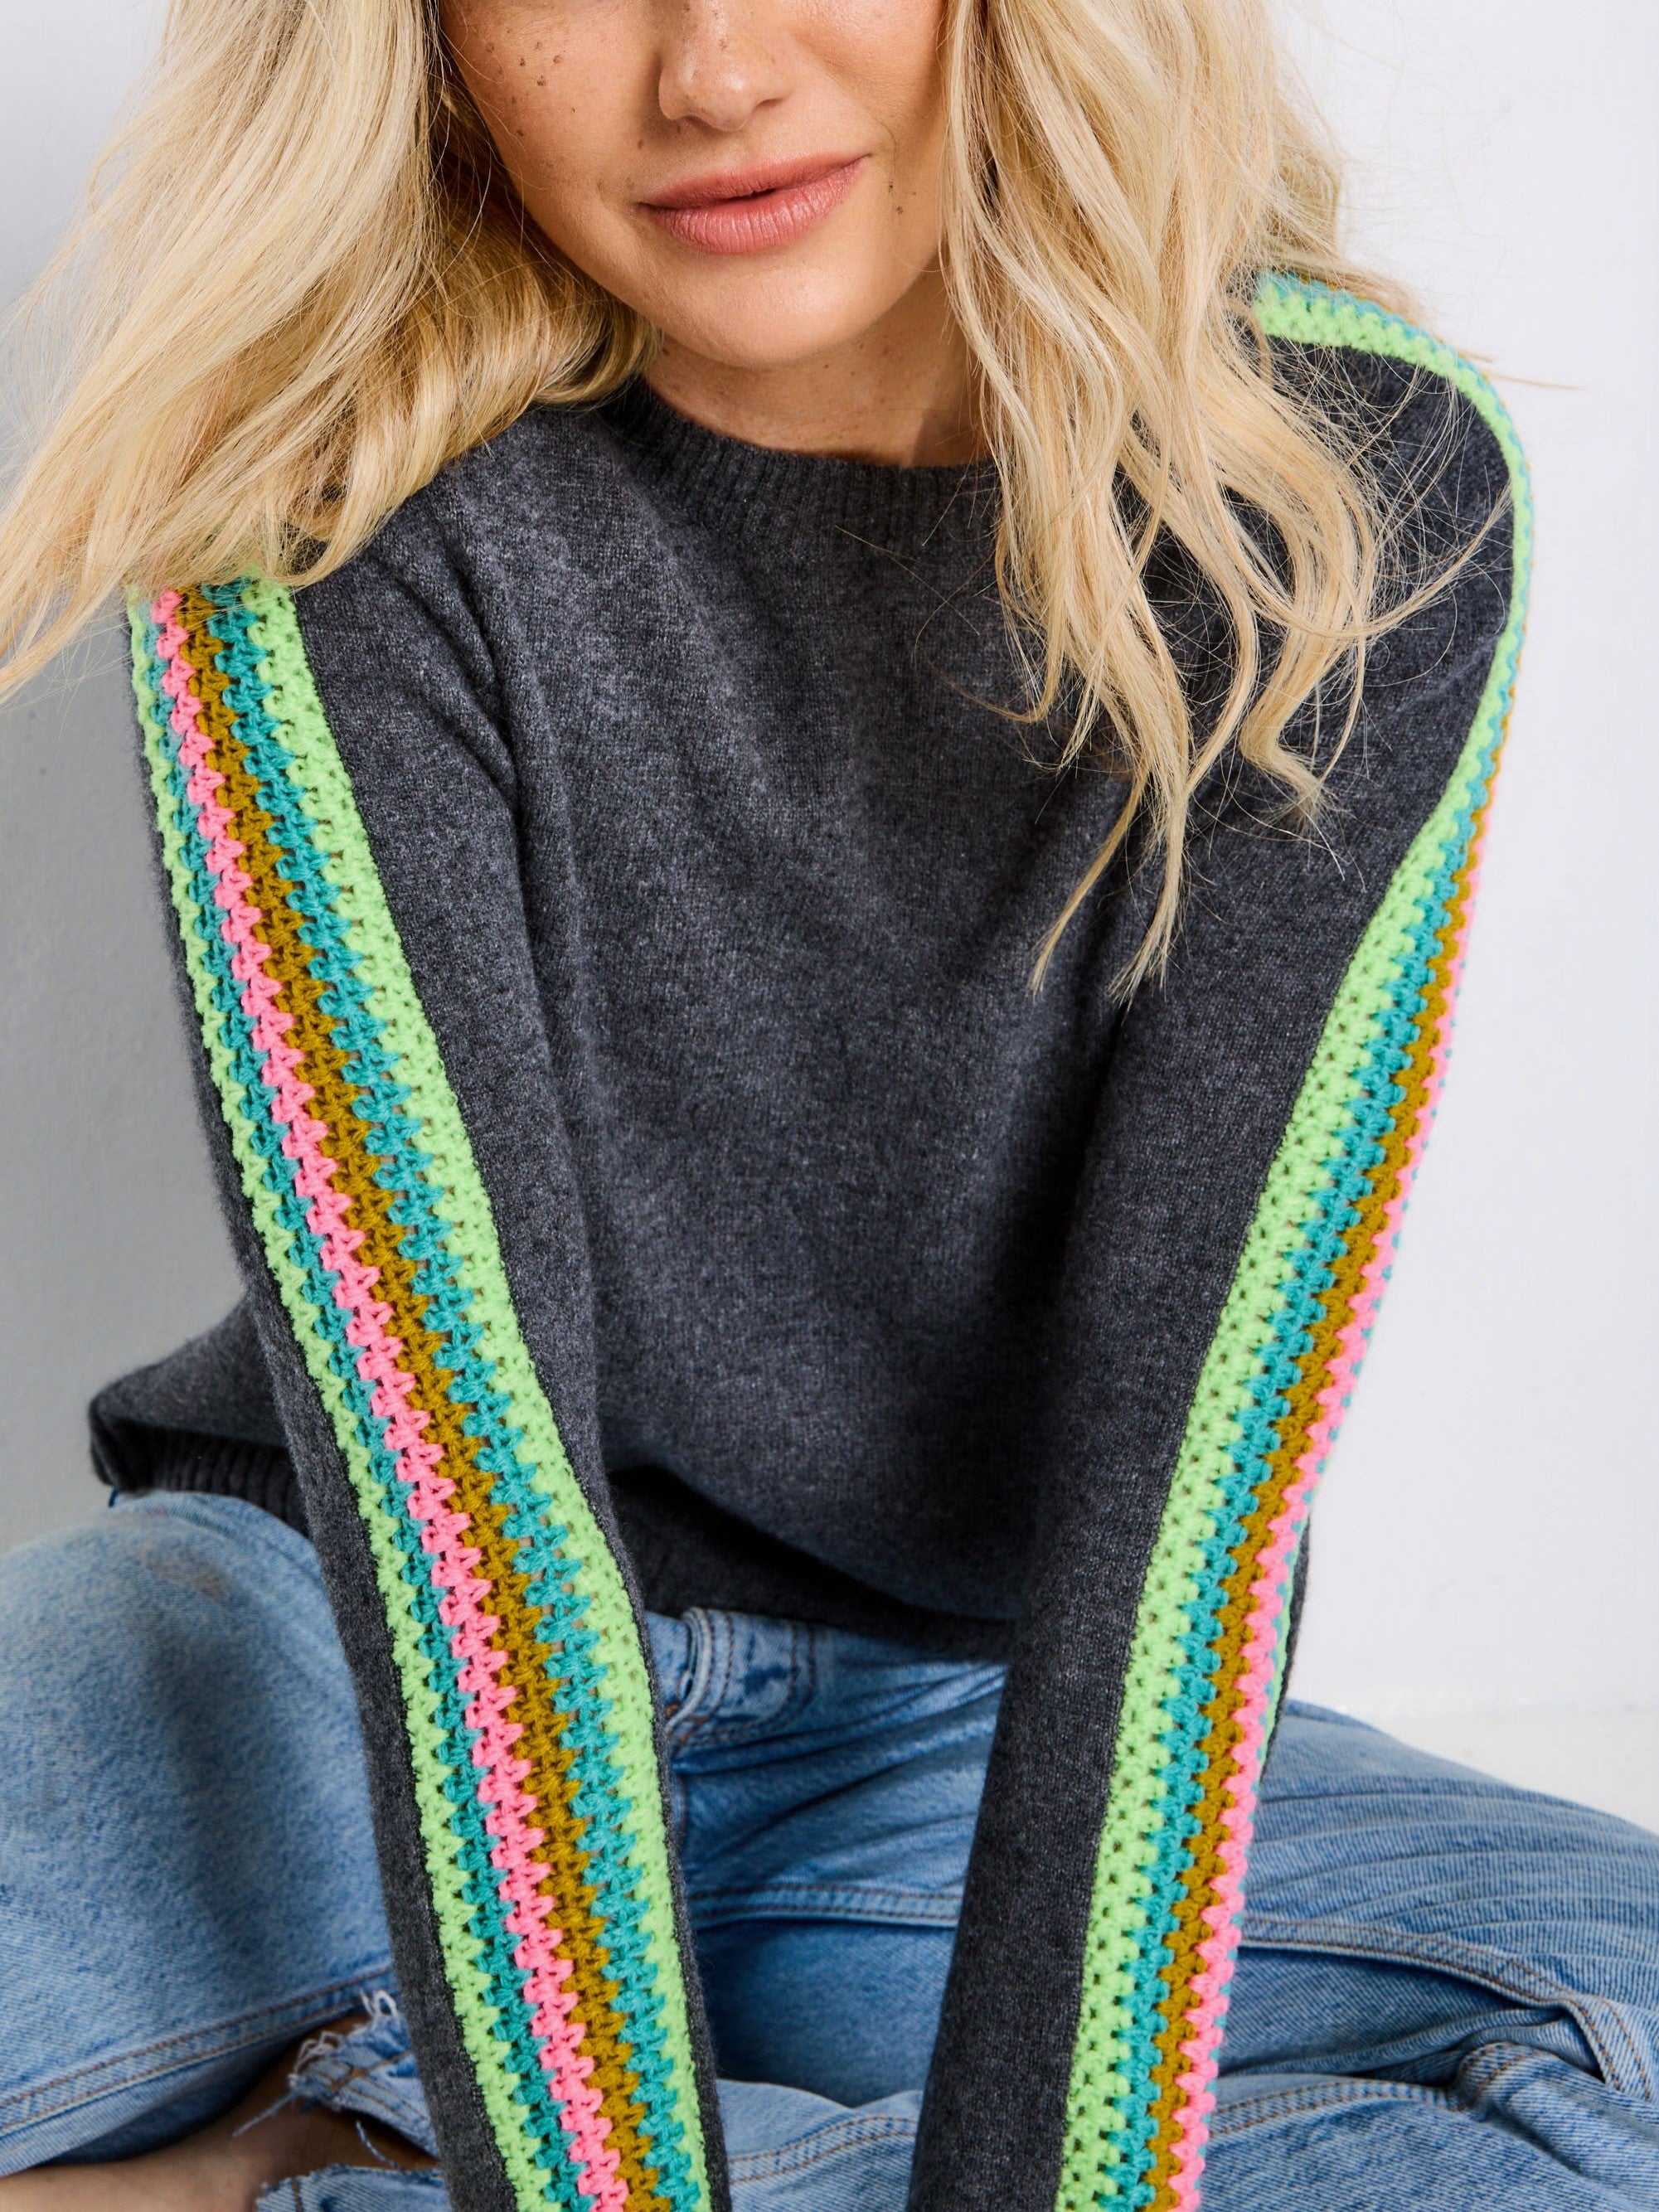 The Crochet Sleeve Cashmere Sweater in Flannel